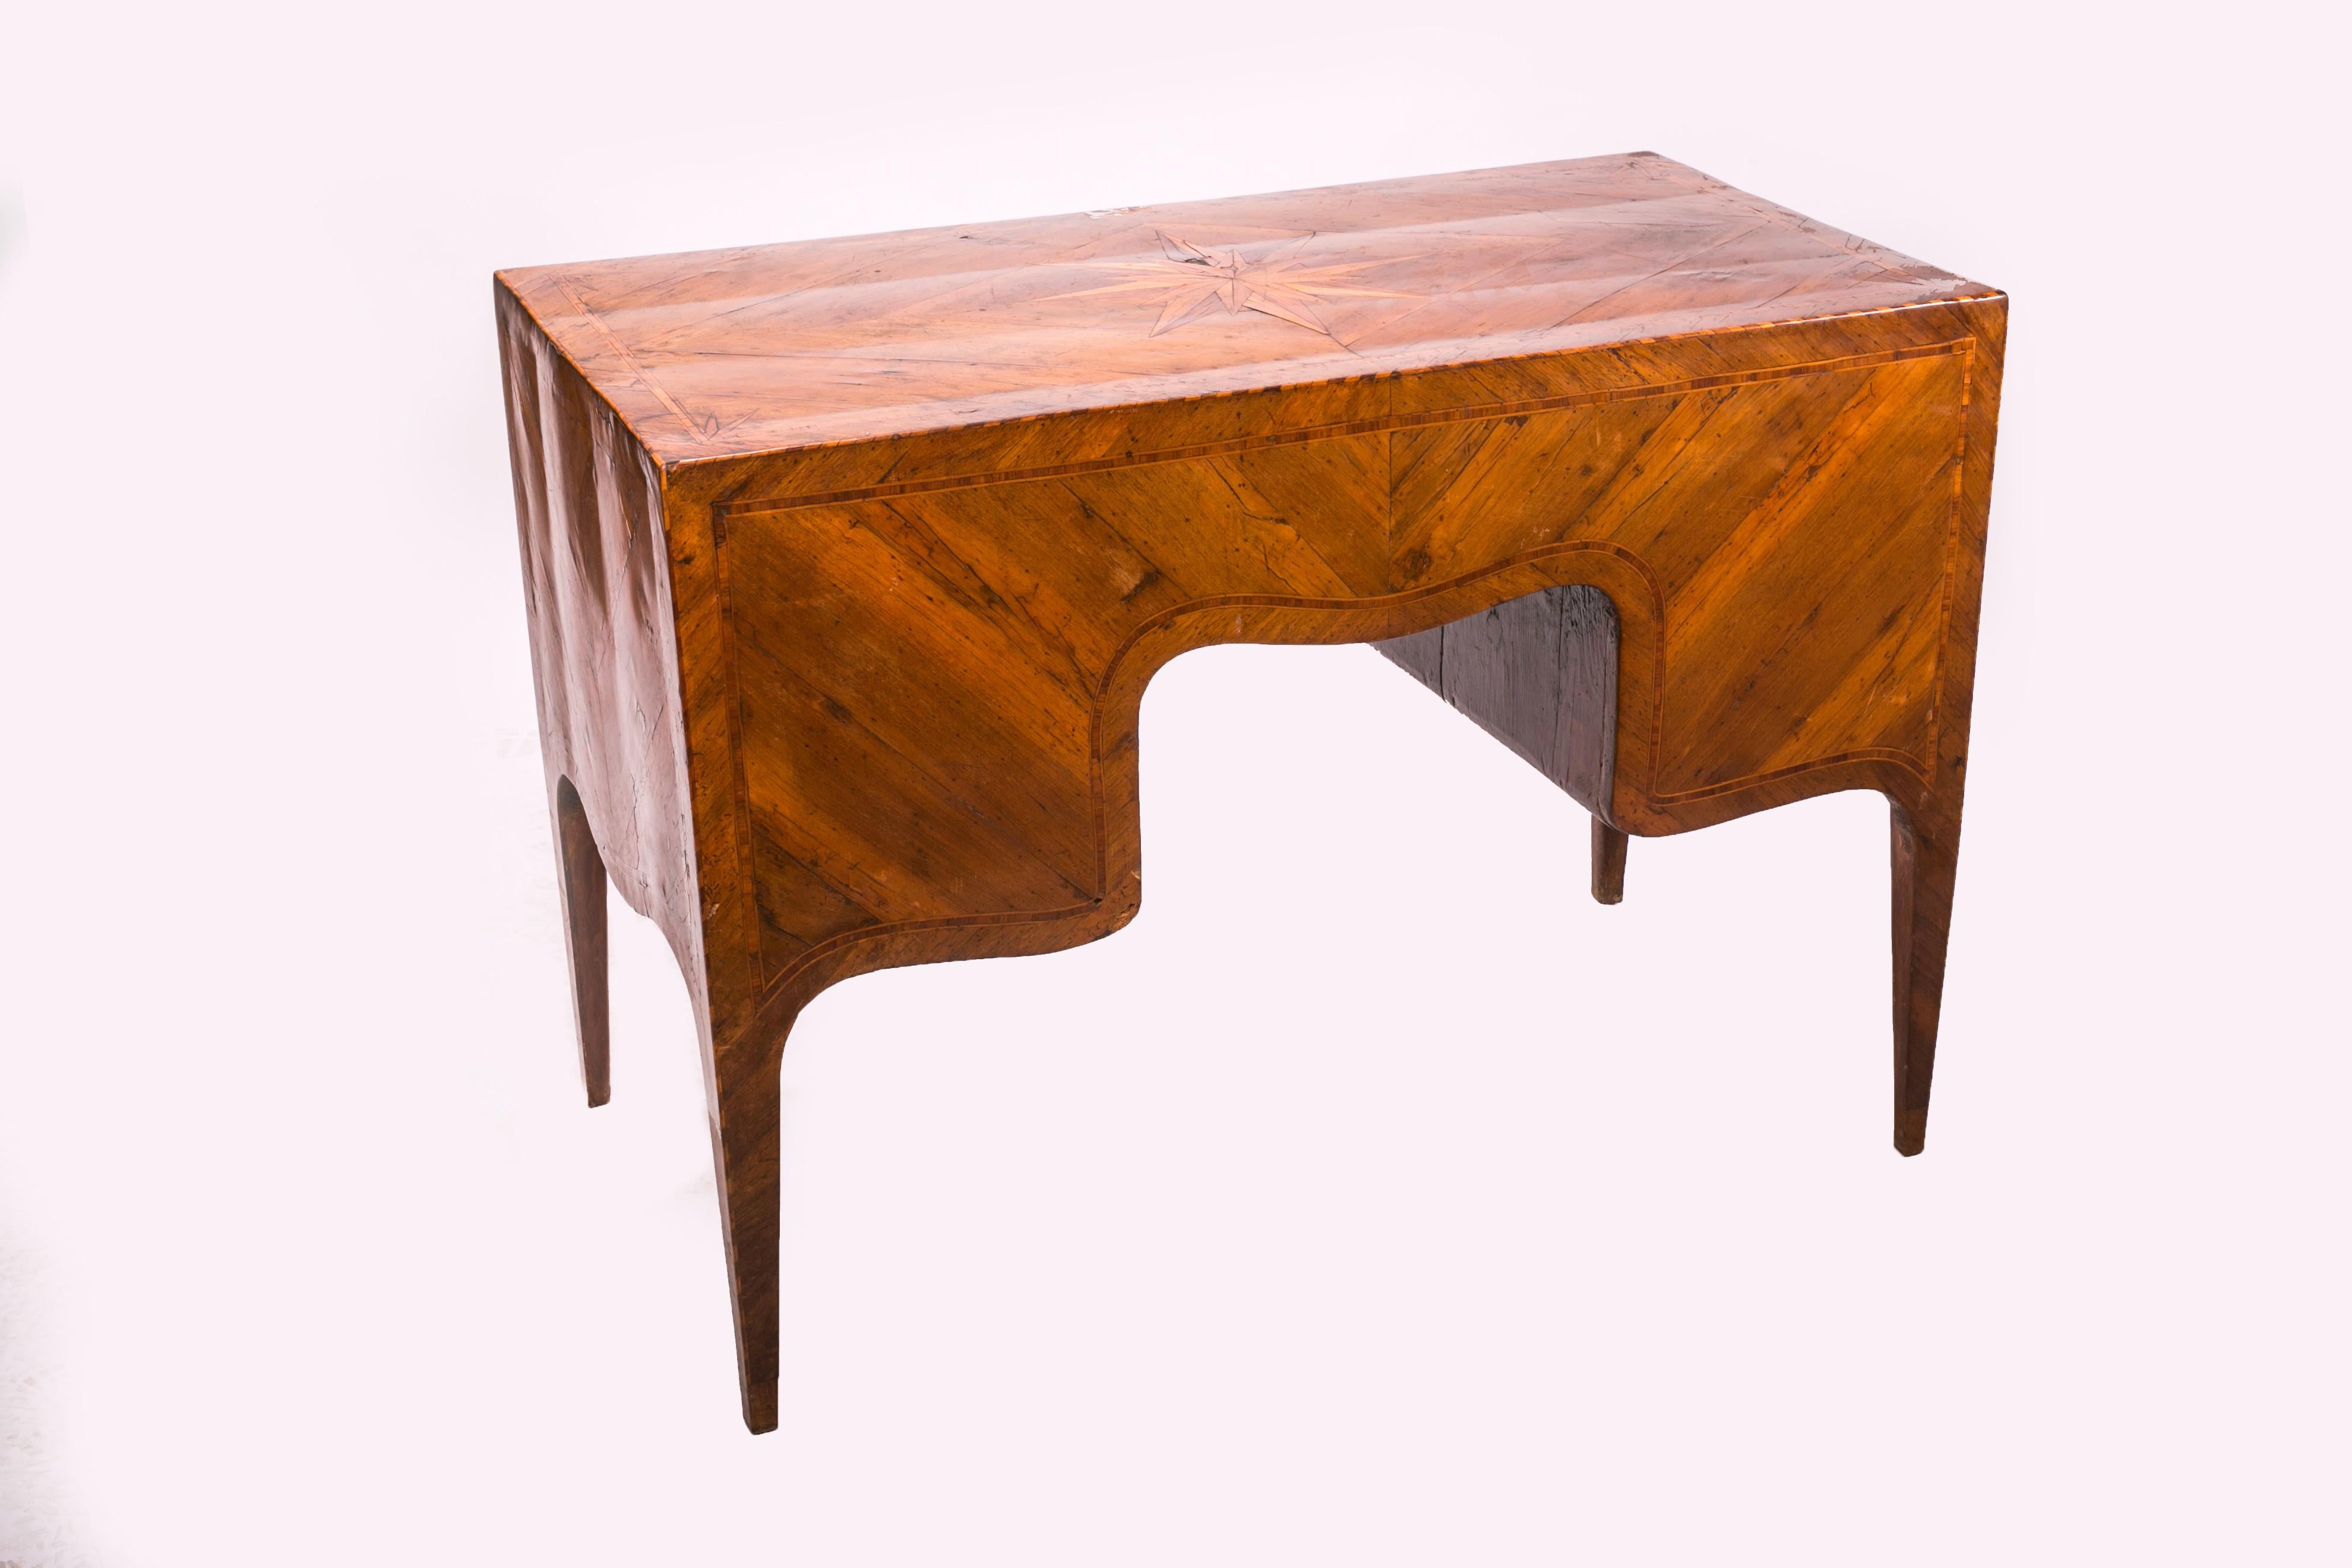 Elegant Louis XVI writing desk with pull-out writing surface, inlaid on the top with a compass rose.

Elegant writing desk with pull-out writing surface, inlaid on the top with a compass rose.
Louis XVI style desk veneered in walnut with maple and